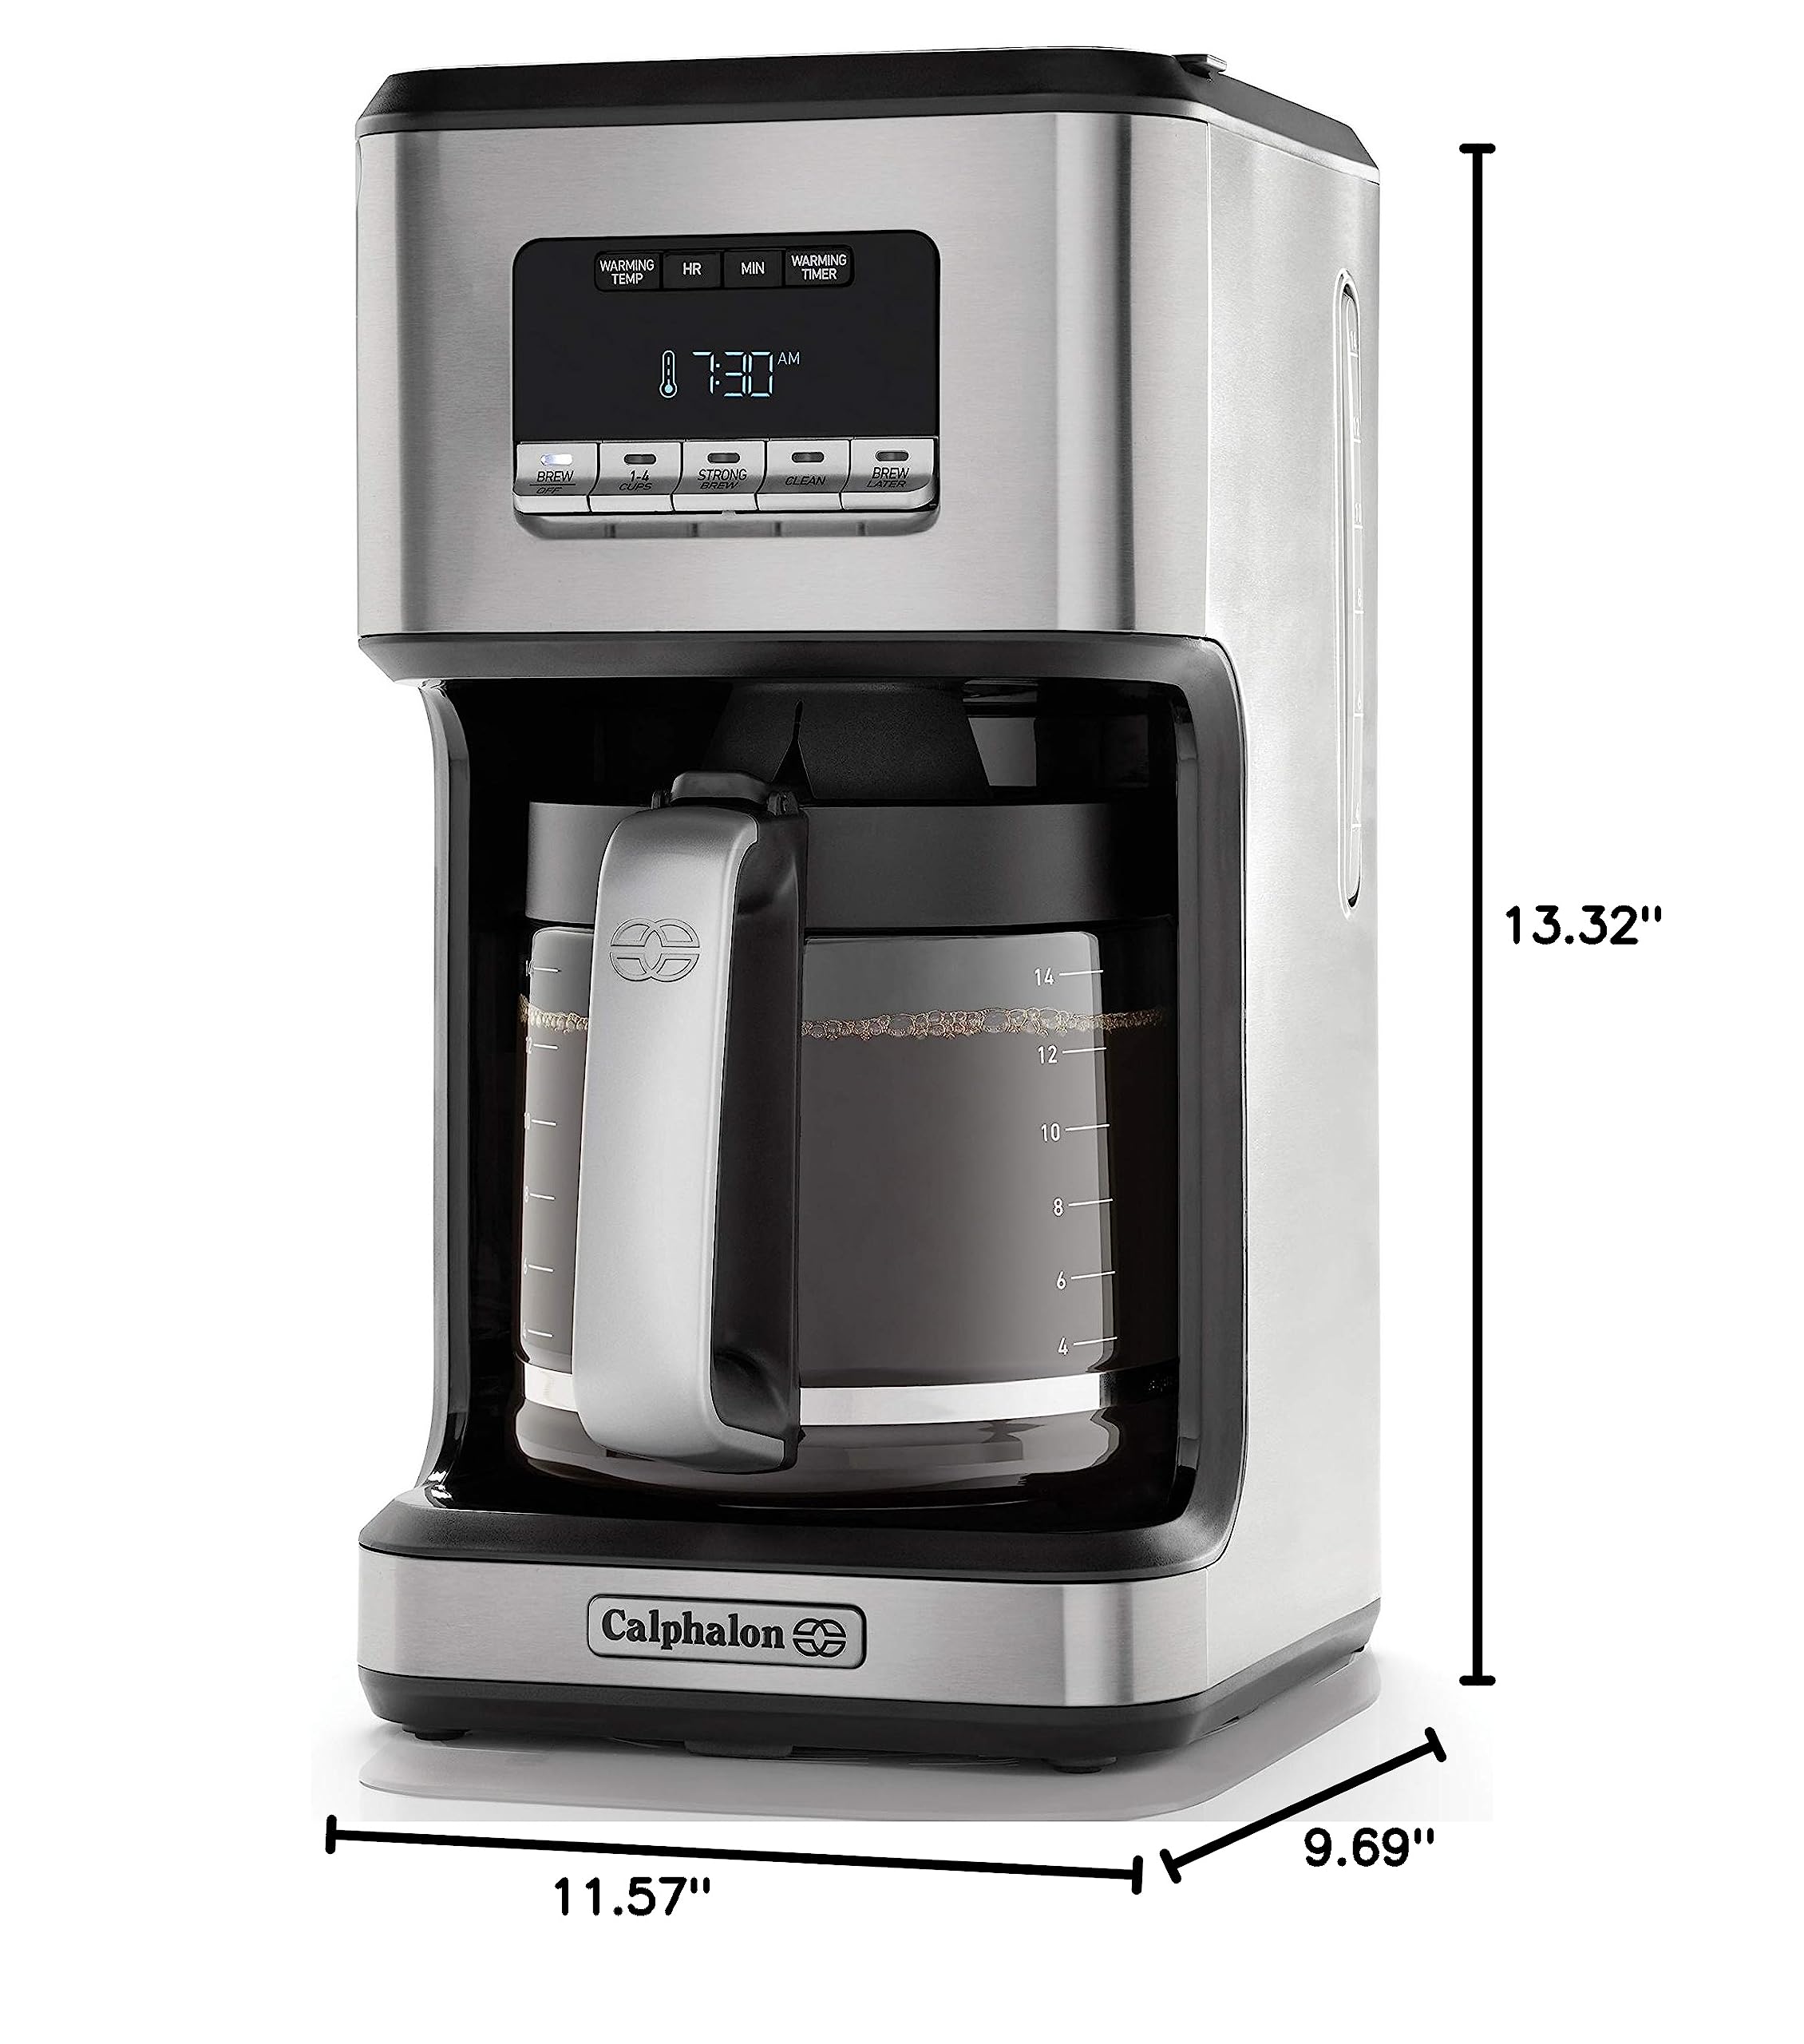 14-Cup Calphalon Programmable Coffee Maker w/ Glass Carafe (Stainless Steel) $36.26 + Free Shipping